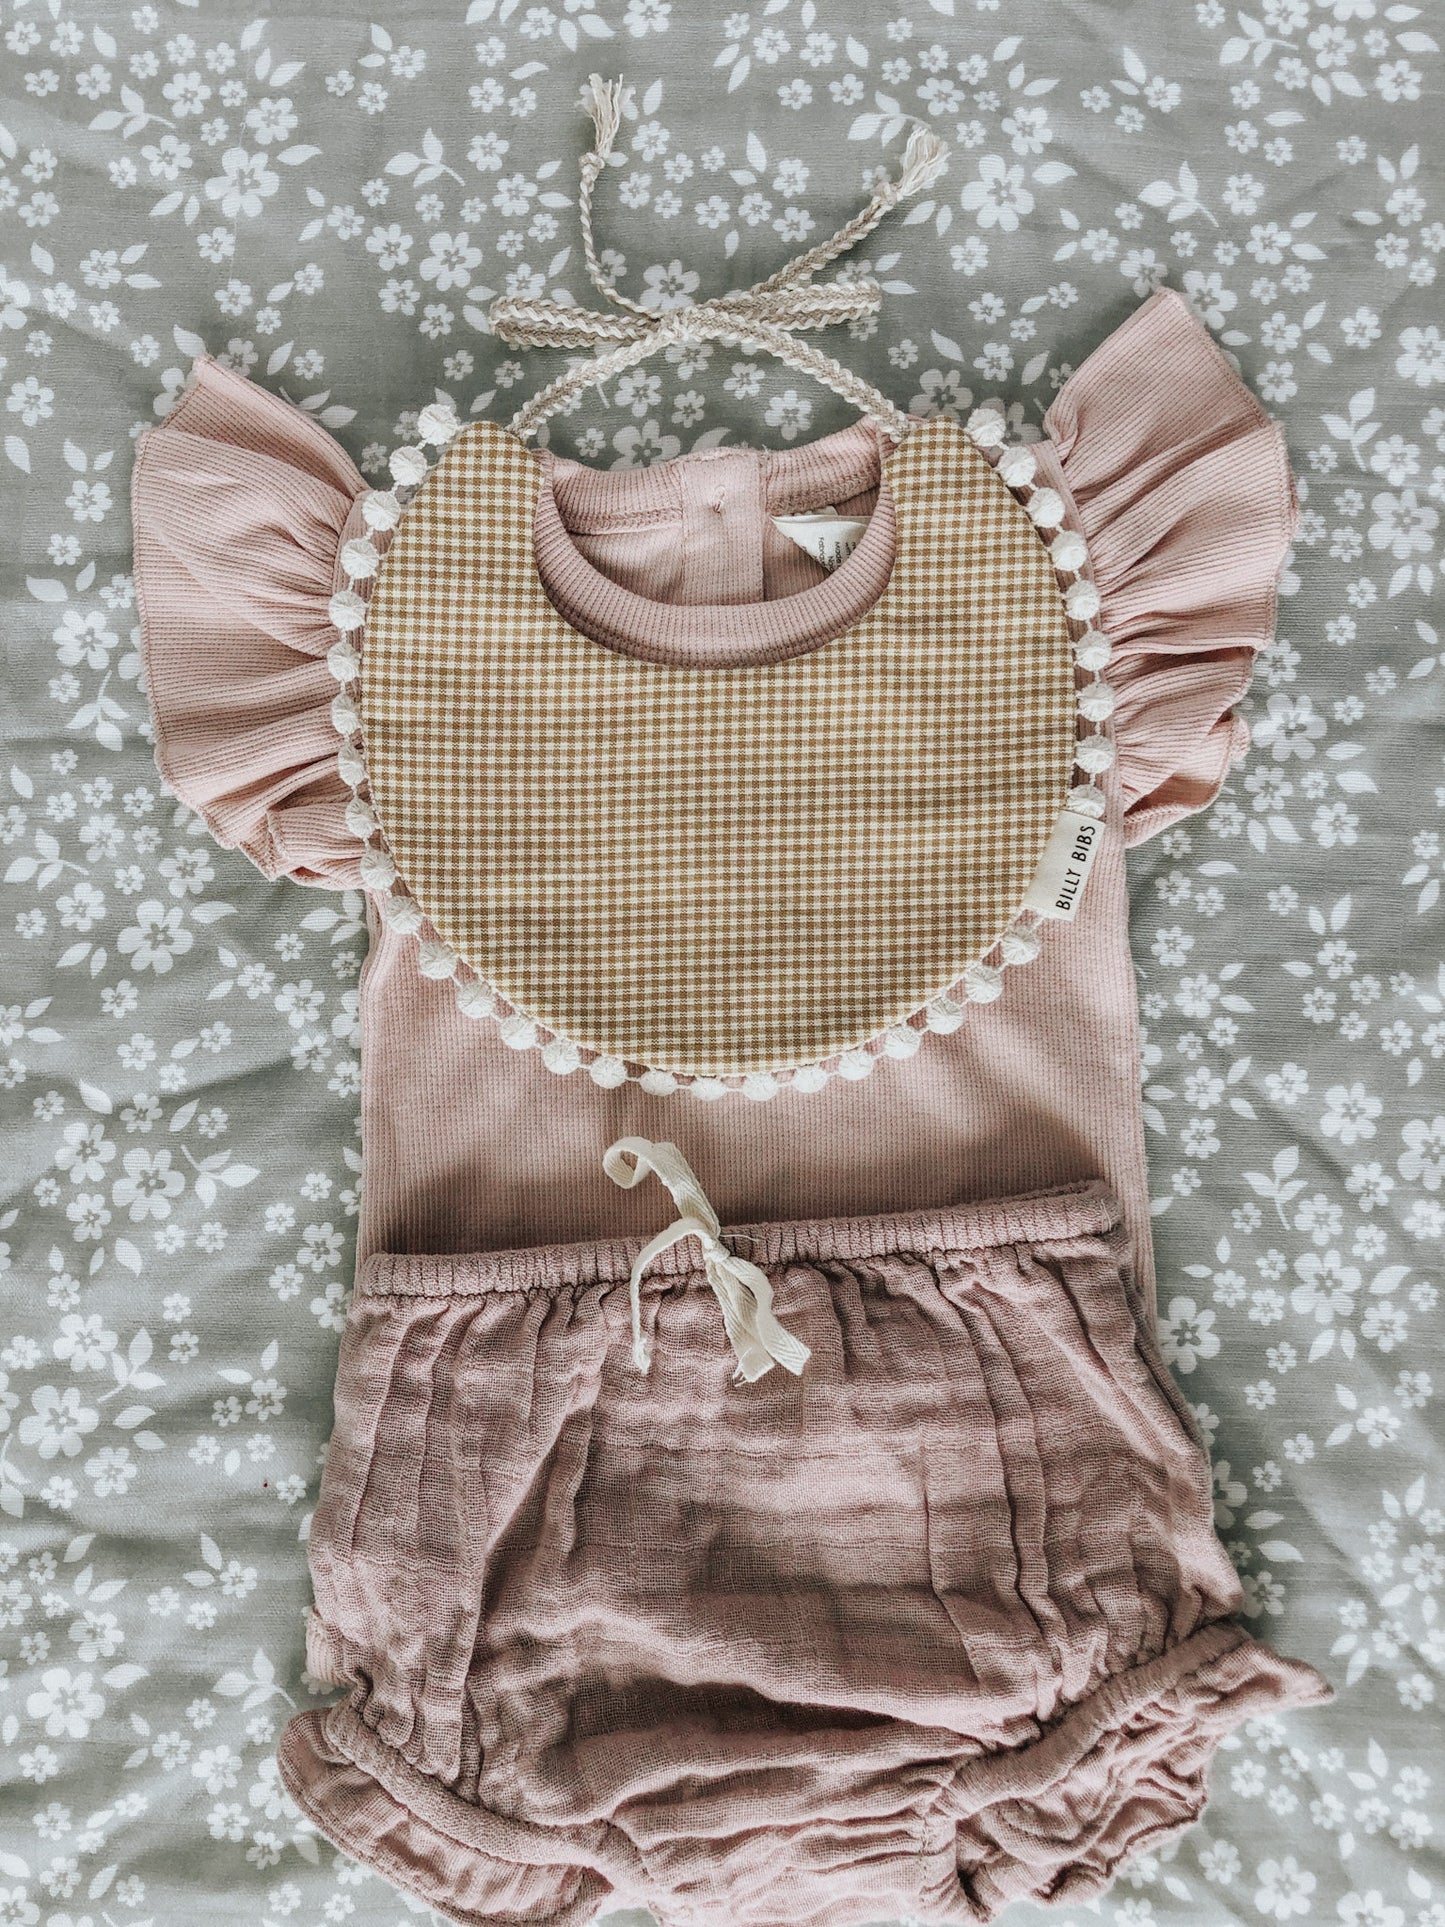 billy-bibs-baby-outfit12